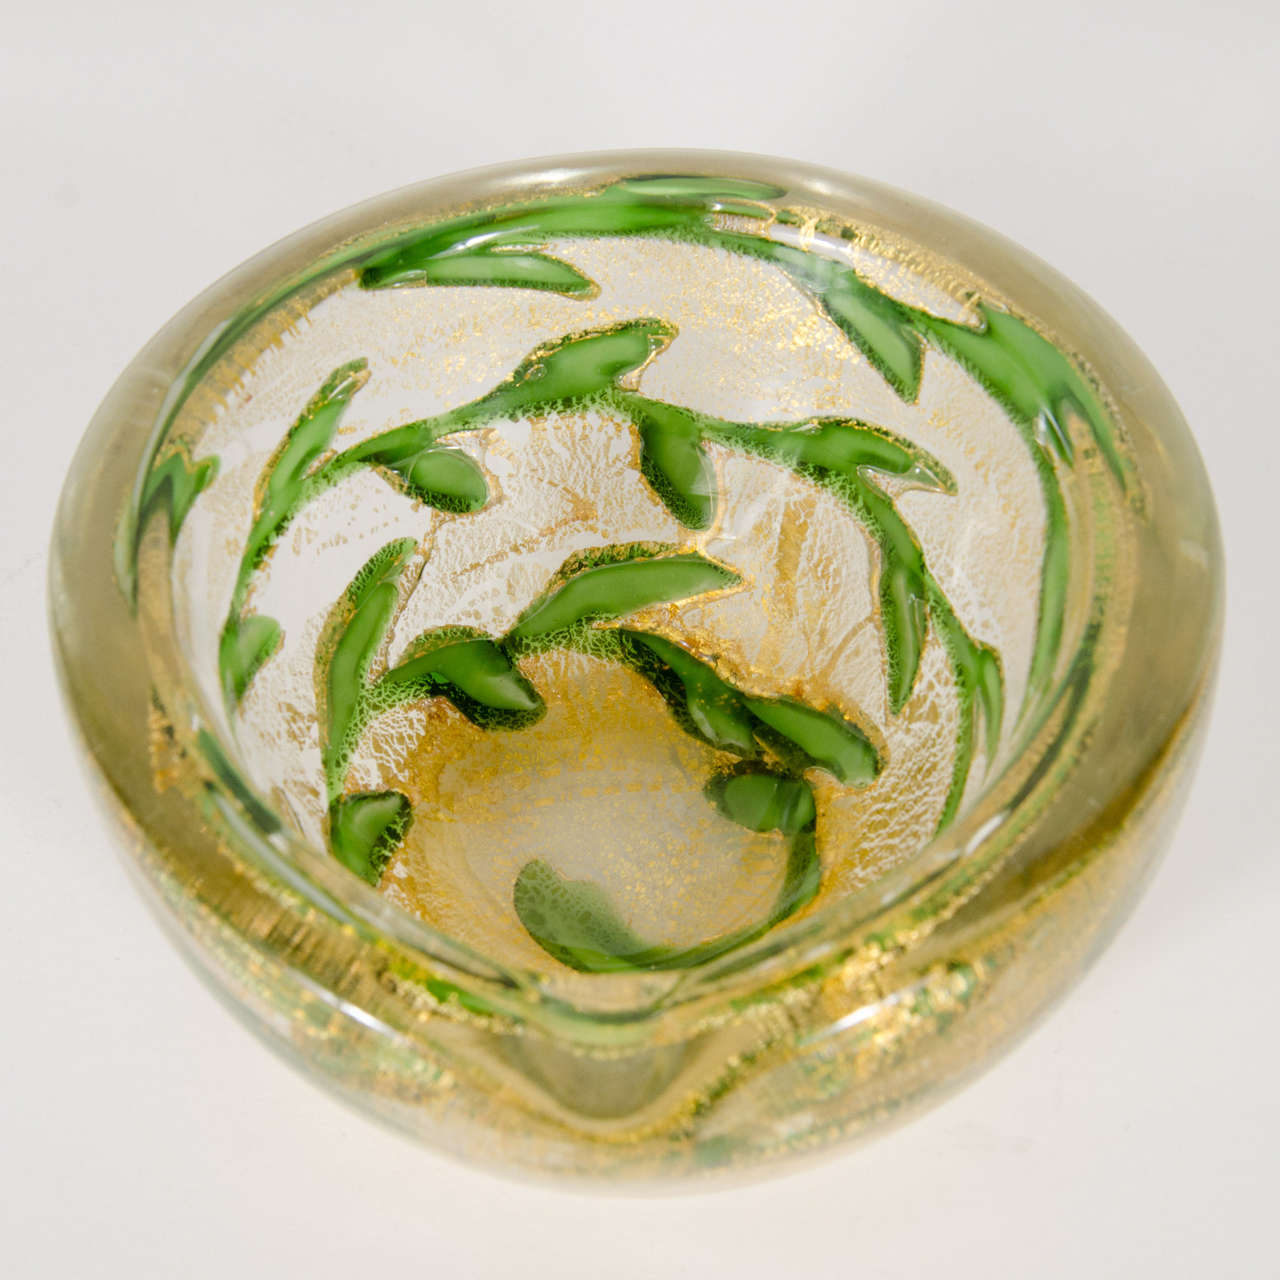 Mid-Century Modernist hand-blown Murano glass ashtray with 24K gold flecks and emerald green leafing motif.  This particular ashtray / bowl is comprised of thick hand-blown Murano glass that features a clean outer shell then is decorated on the